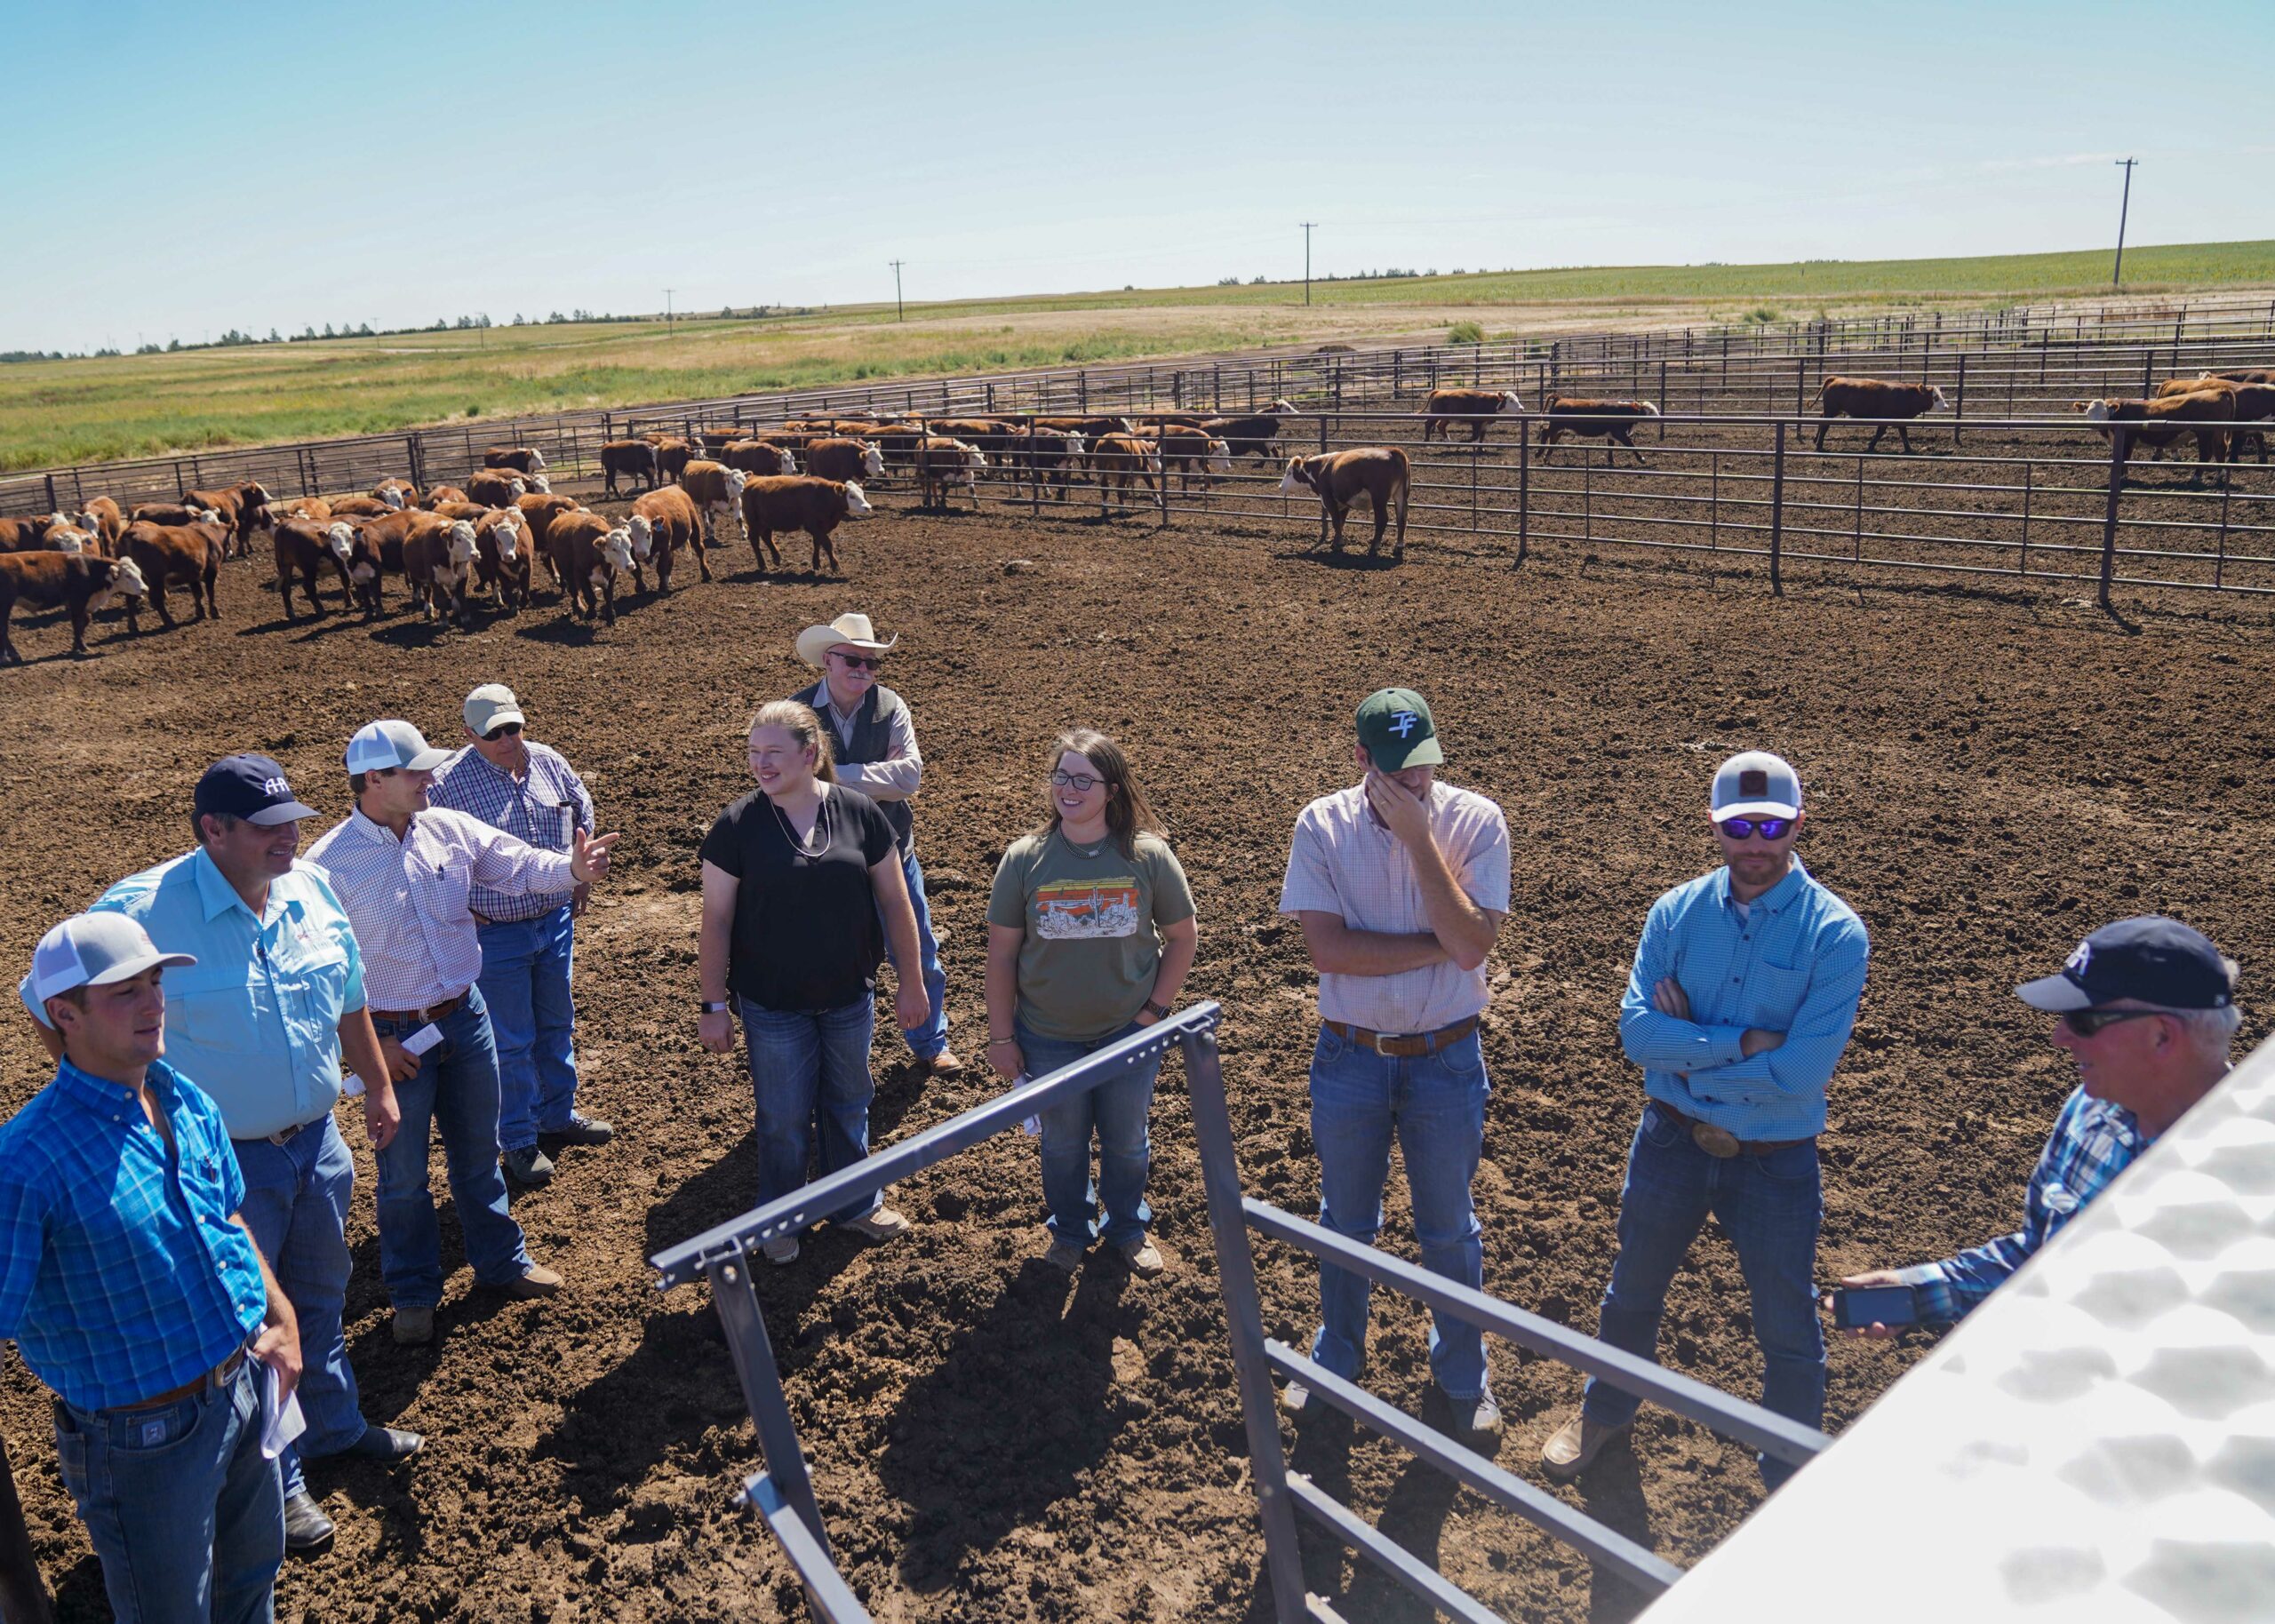 A group of Seedstock Academy members standing in front of a Hereford cattle pen.